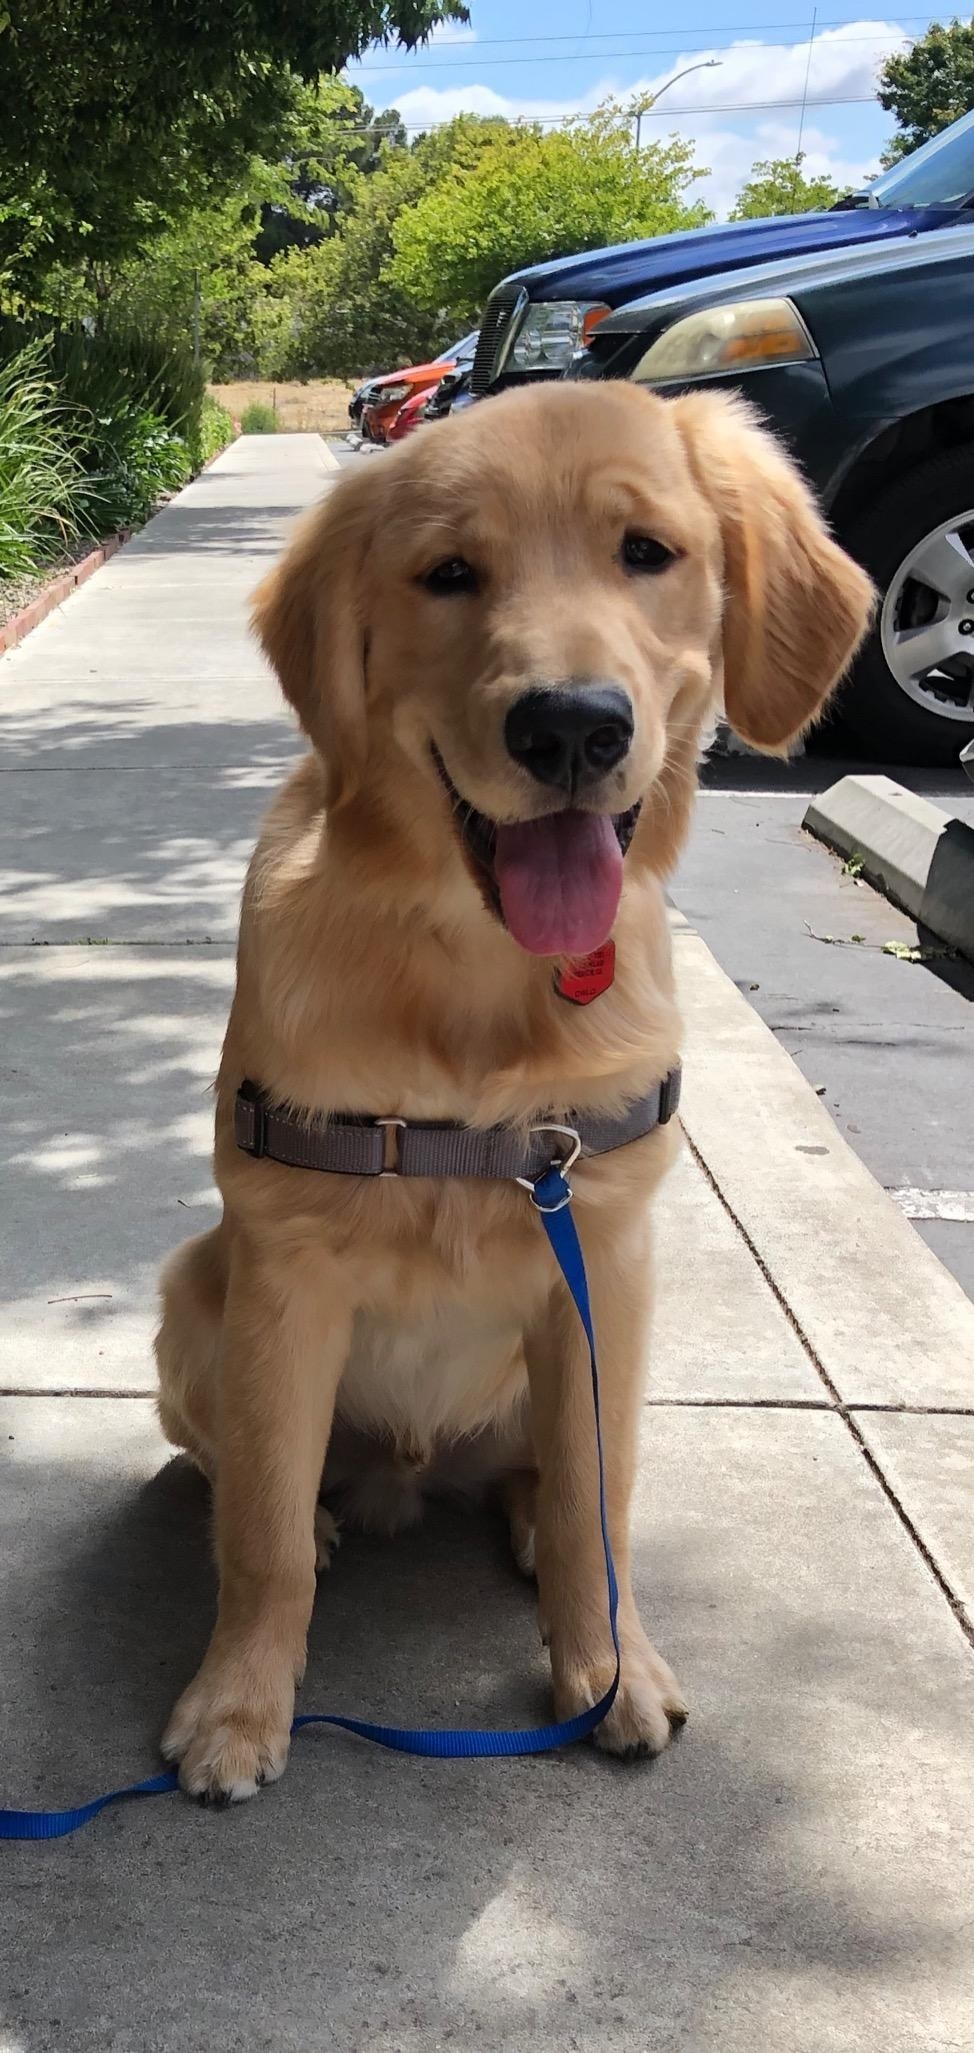 A reviewer&#x27;s photo of their golden retriever wearing the gray and blue harness